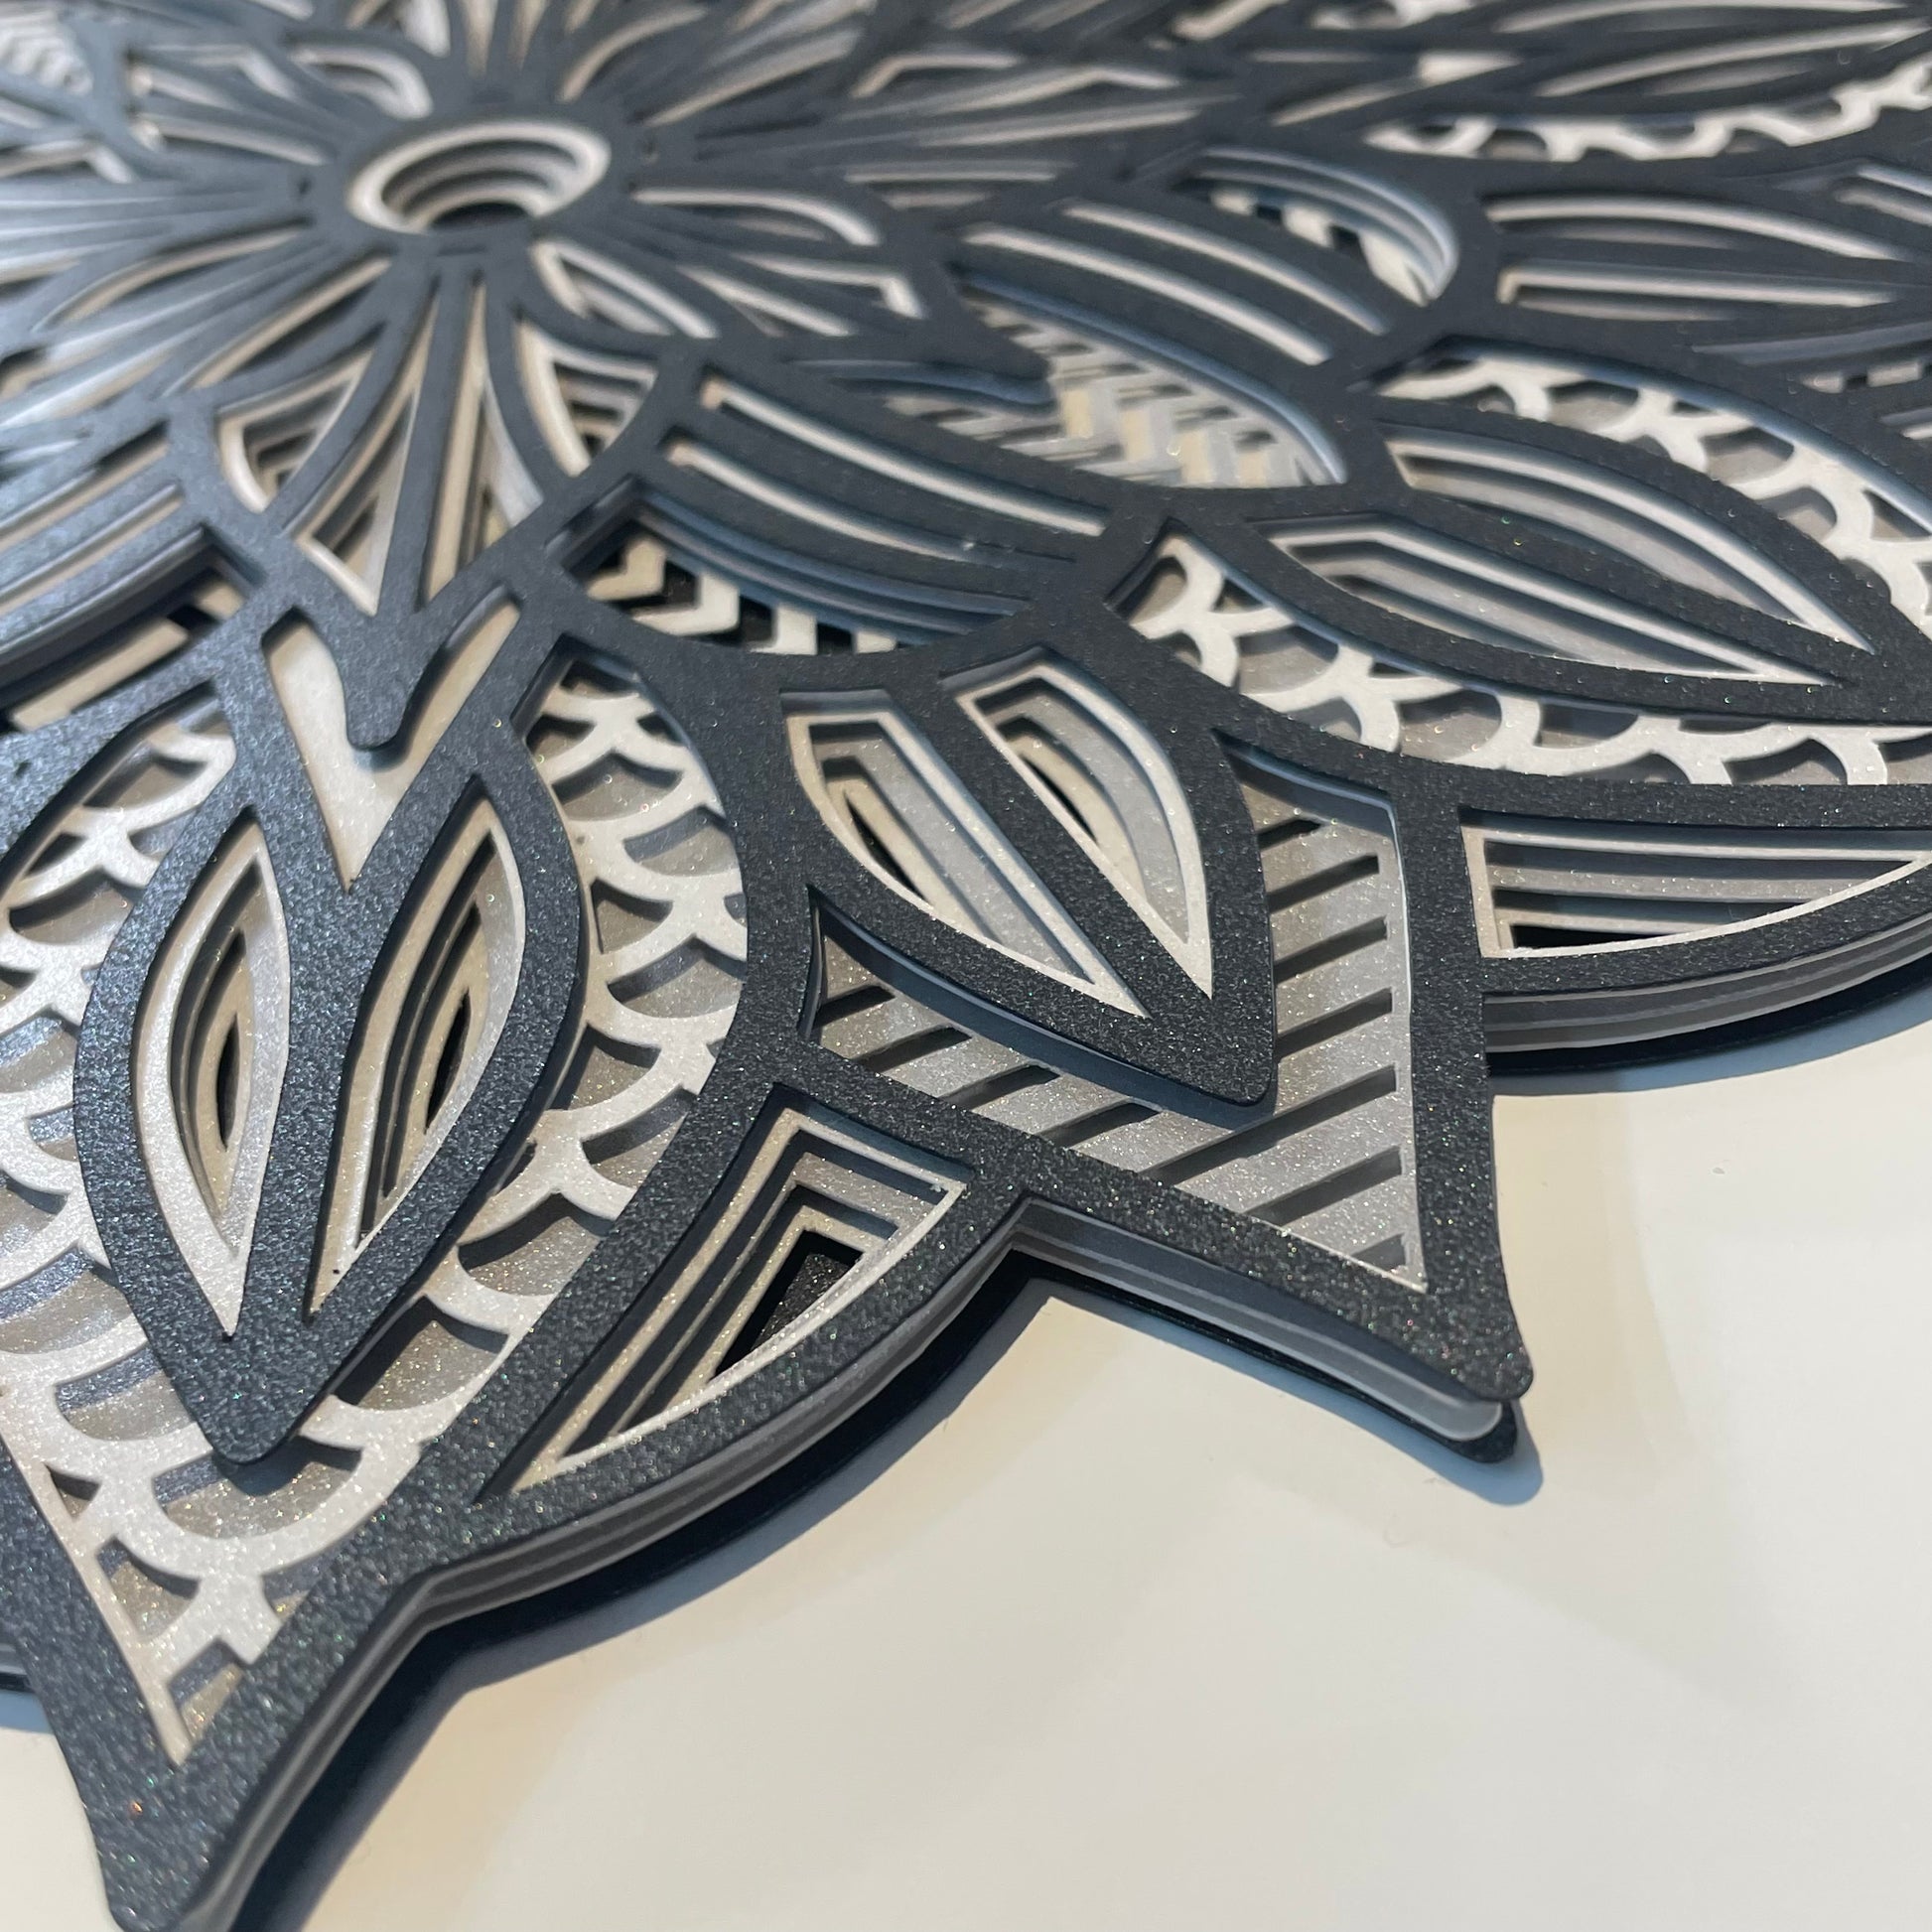 Close up view of a 3d layered Mandala SVG Design by Home Stitchery Decor. We cut this out with our Cricut Maker and you can too! Just follow along with our complete 3d Layered Mandala tutorial. Find your favorite 3d layered Mandala designs by Home Stitchery Decor